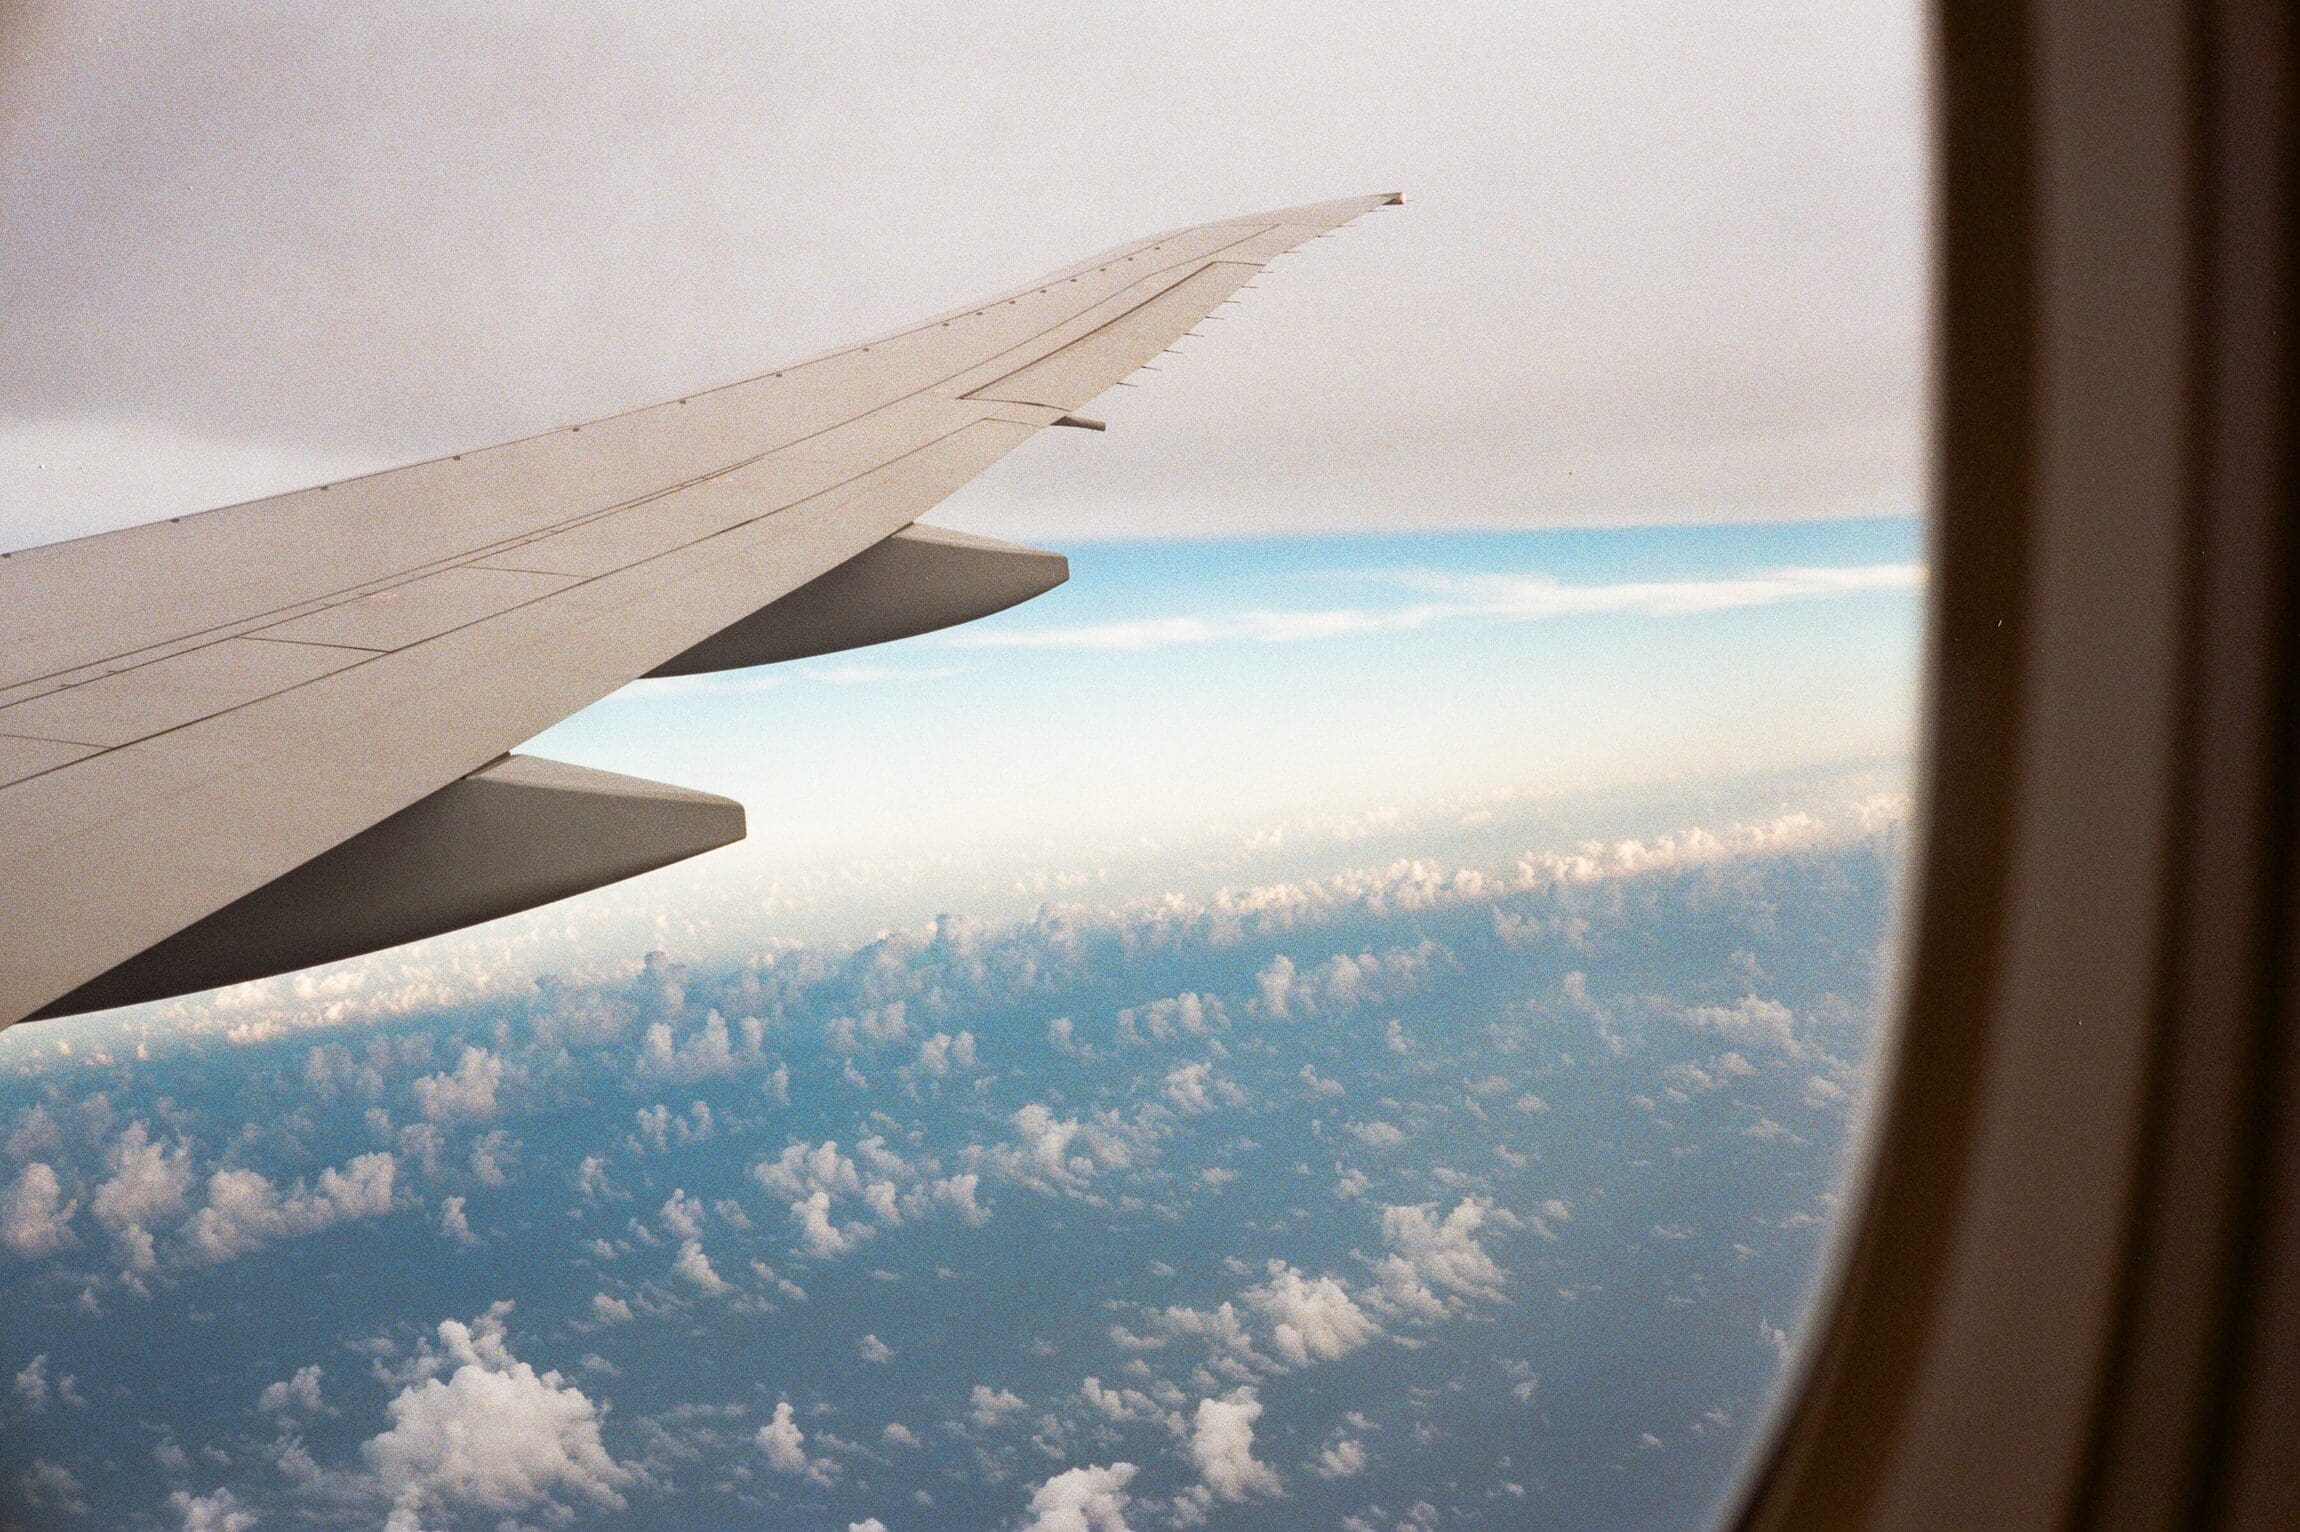 View from an airplane window showing the wing in flight.